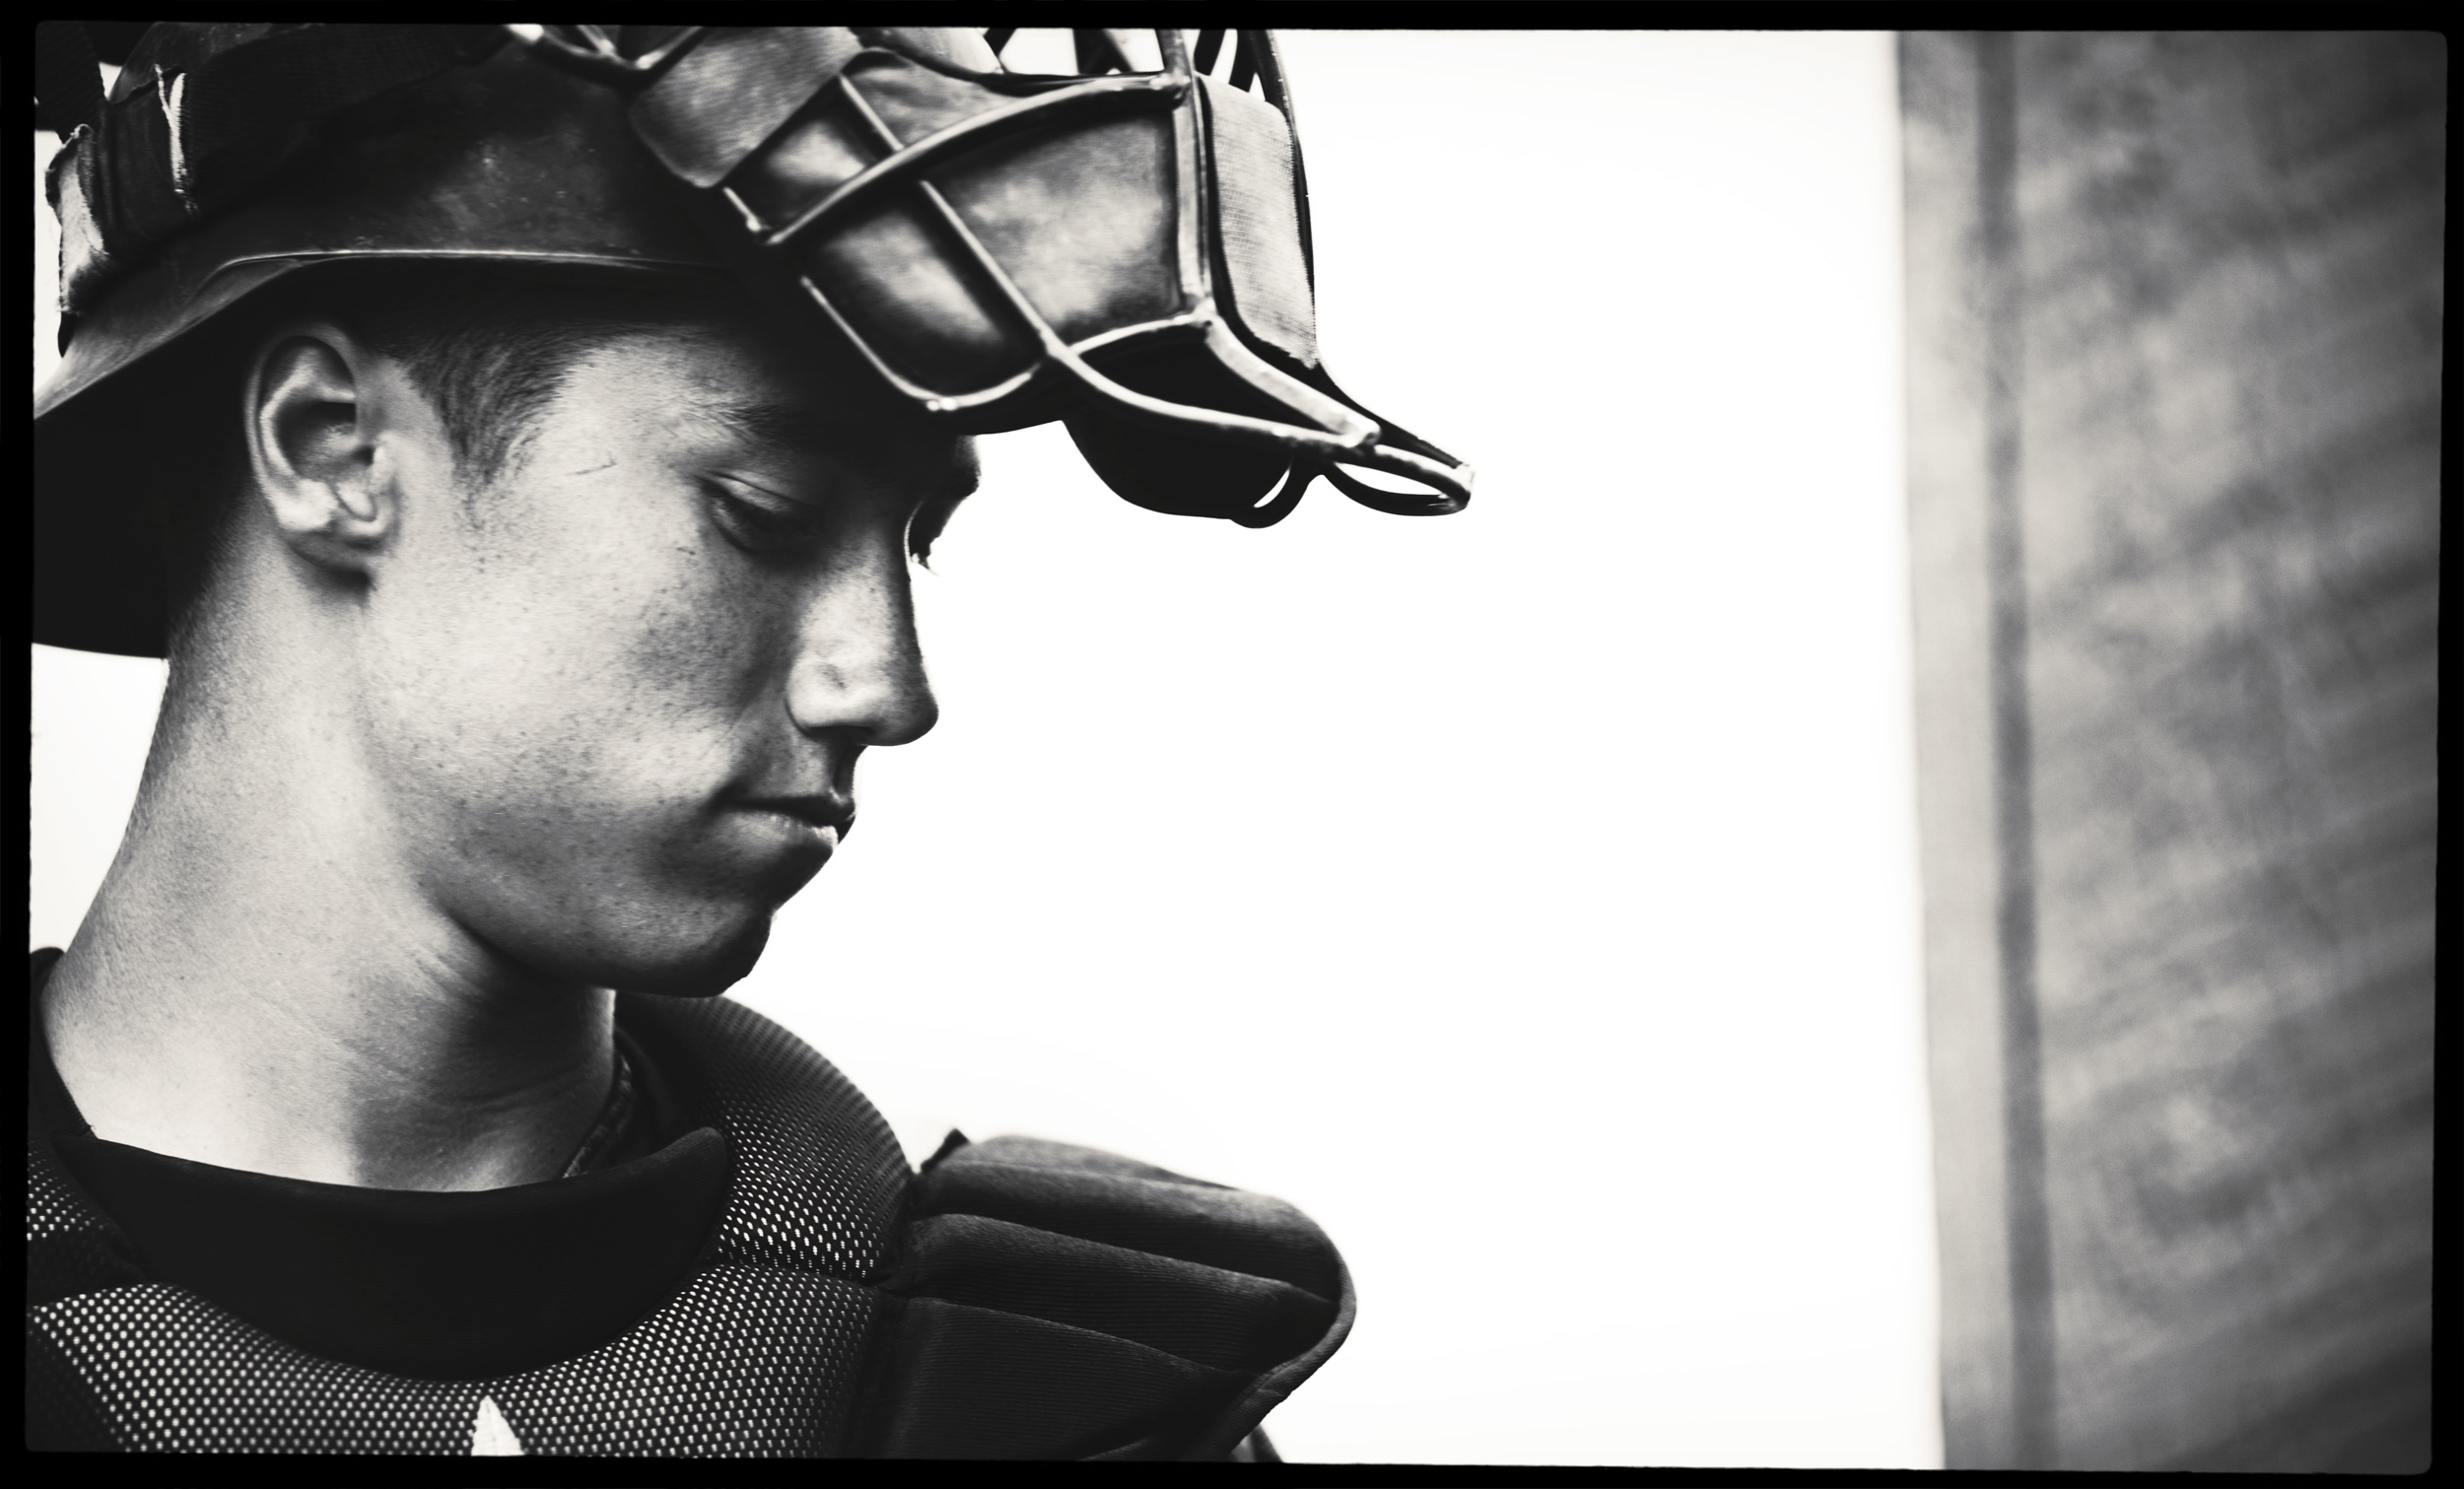 Portrait of a baseball catcher with his face mask